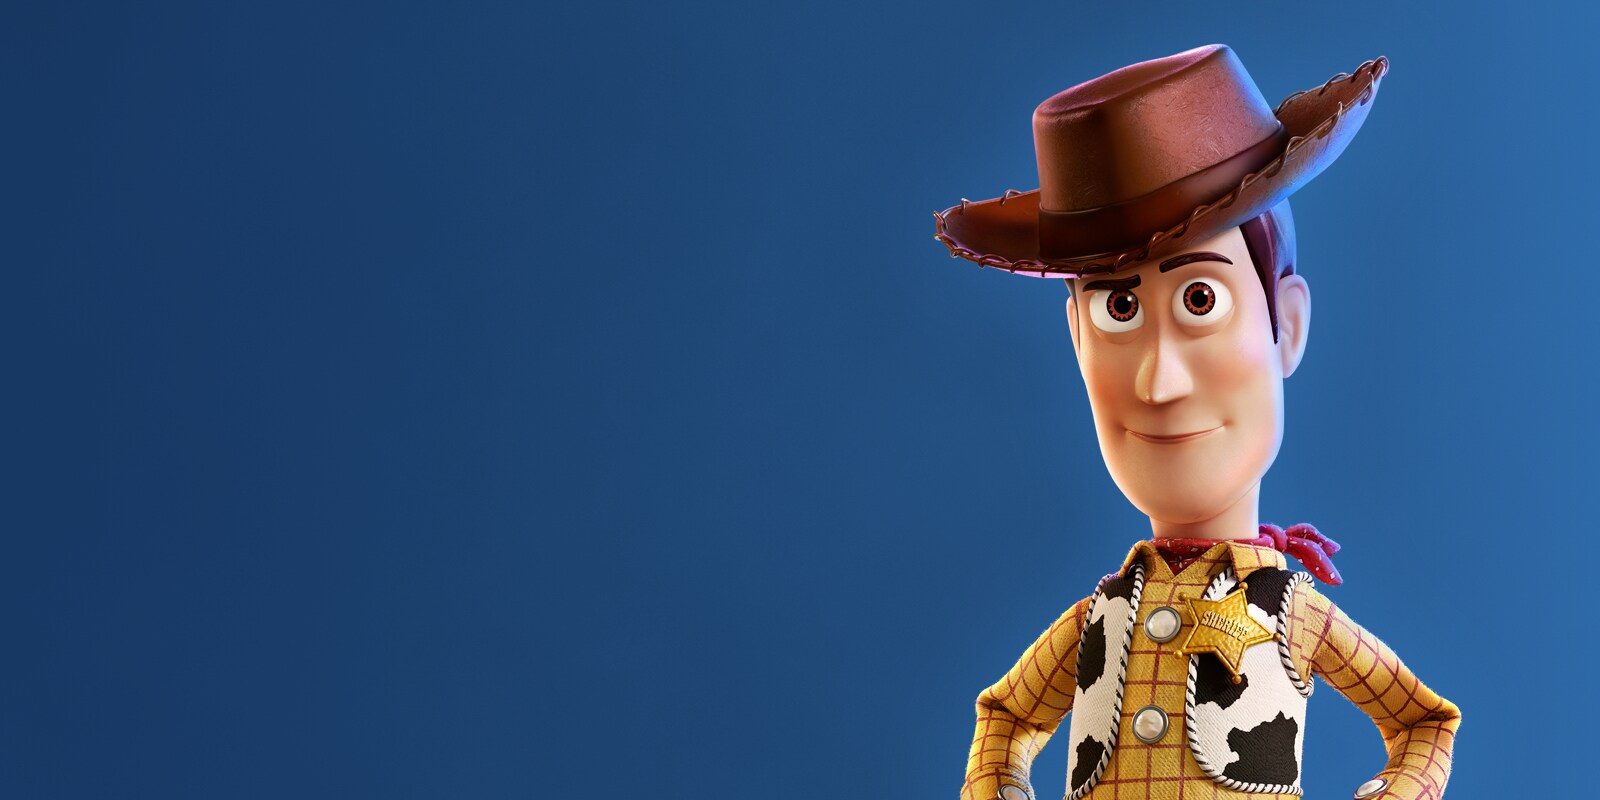 Content_Synopsis_Toy Story 4_Entradas